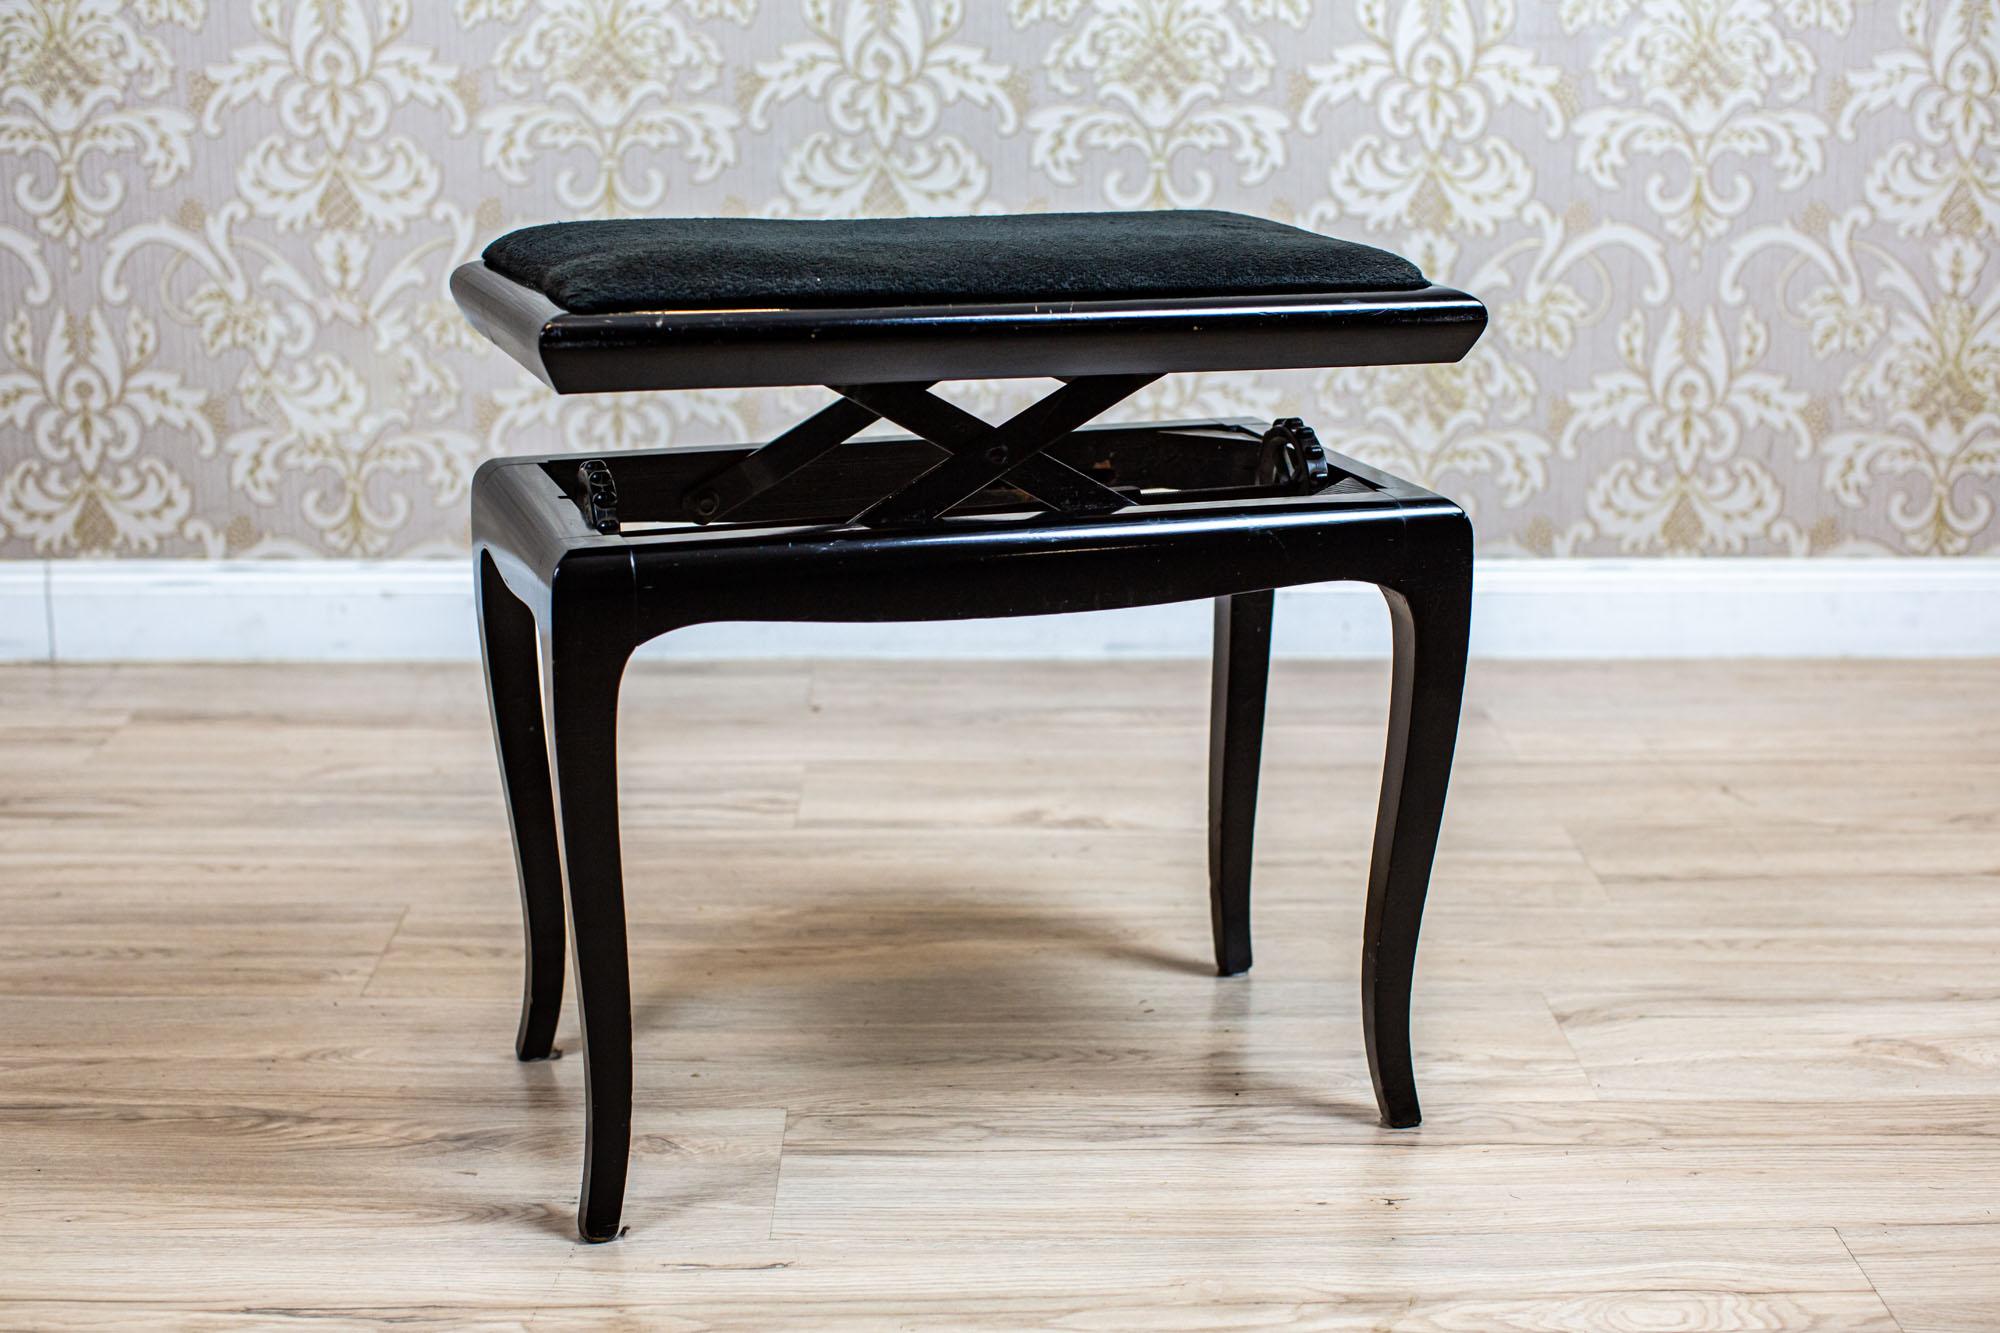 European Black Piano Stool From the Early 20th Century with Upholstered Seat For Sale